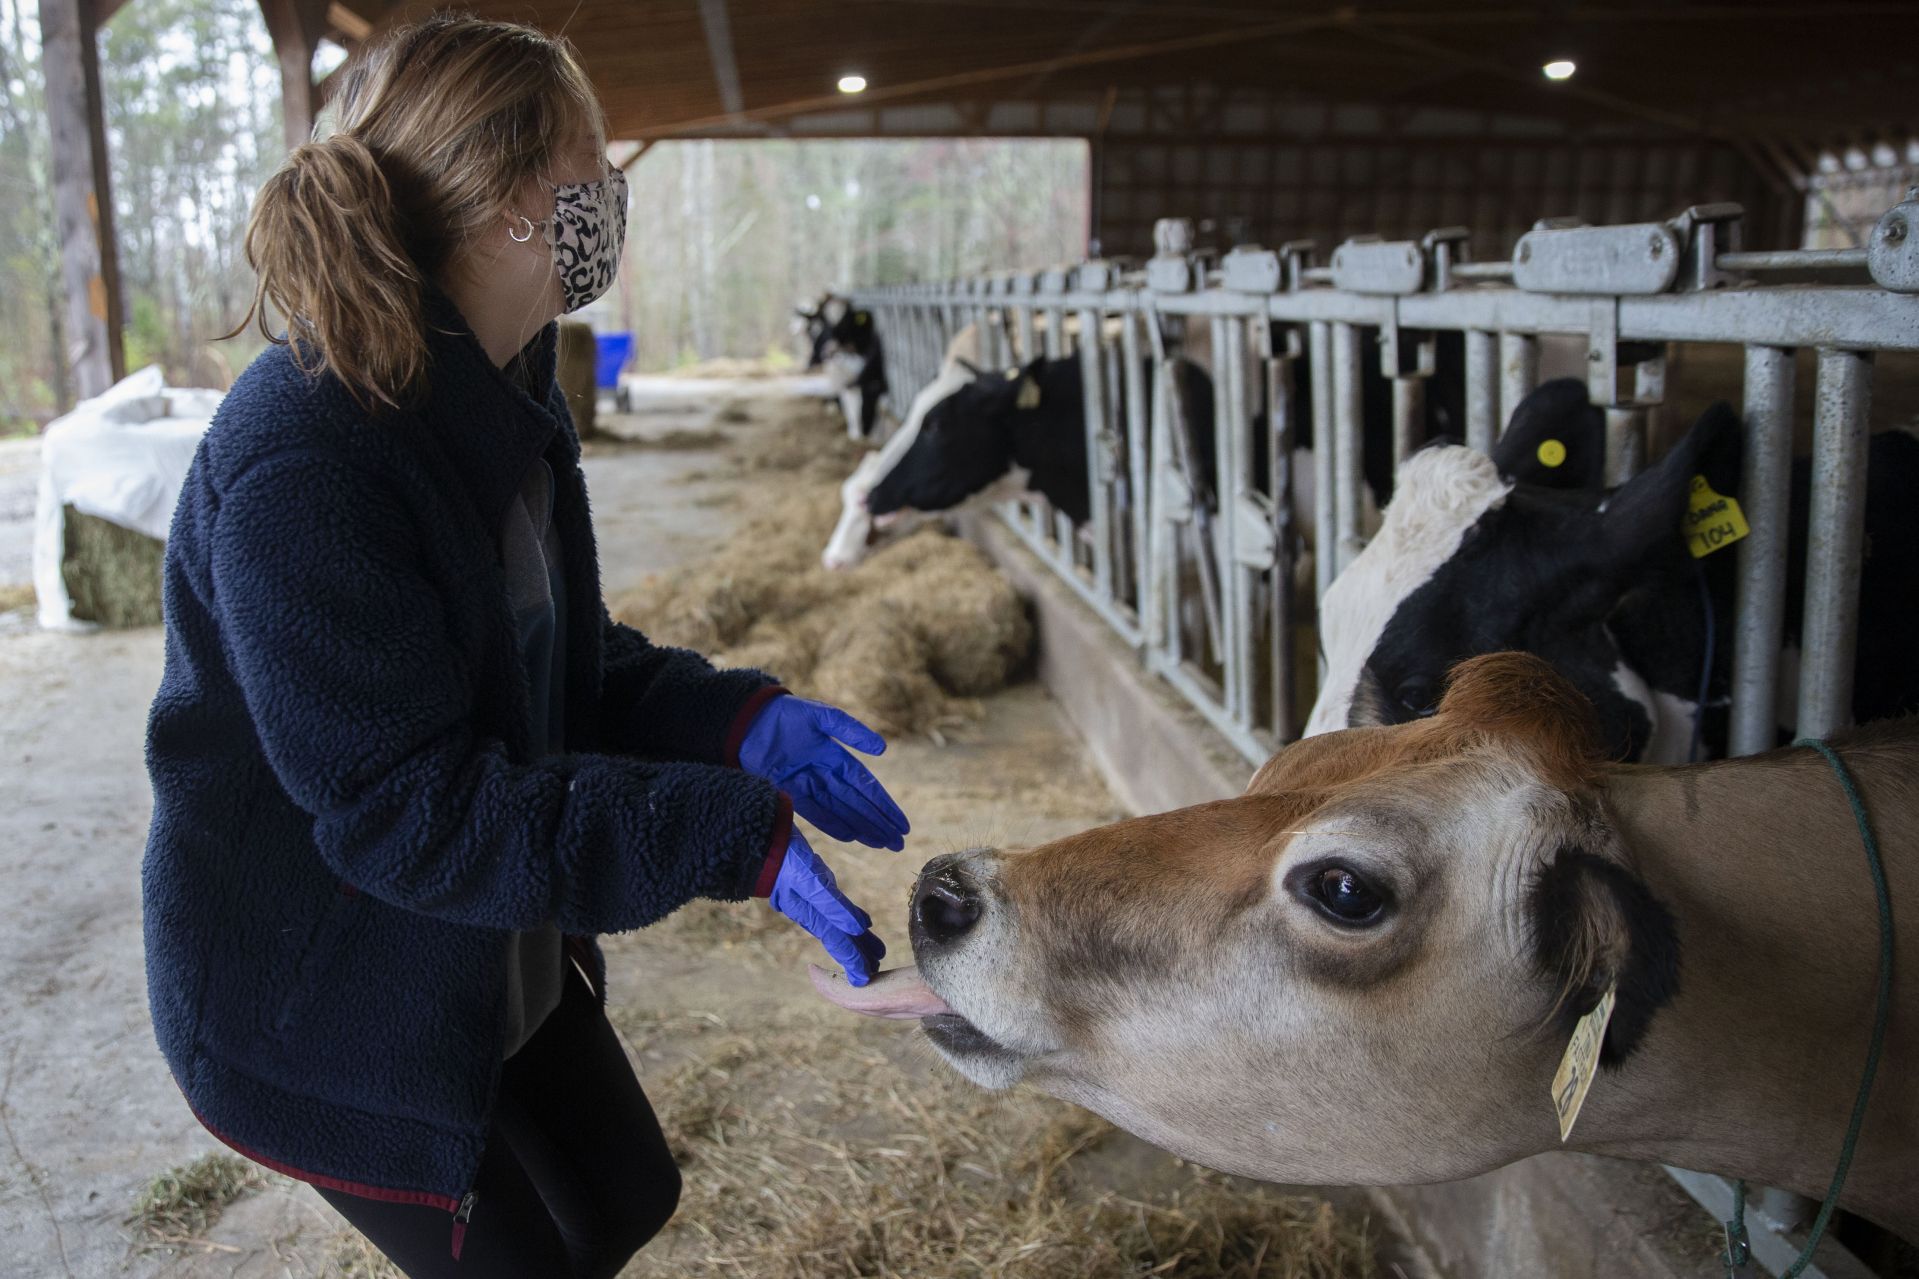 Virginia Guanci reacts to a lick from one of the dairy cows at Wolfe’s Neck. (Phyllis Graber Jensen/Bates College)